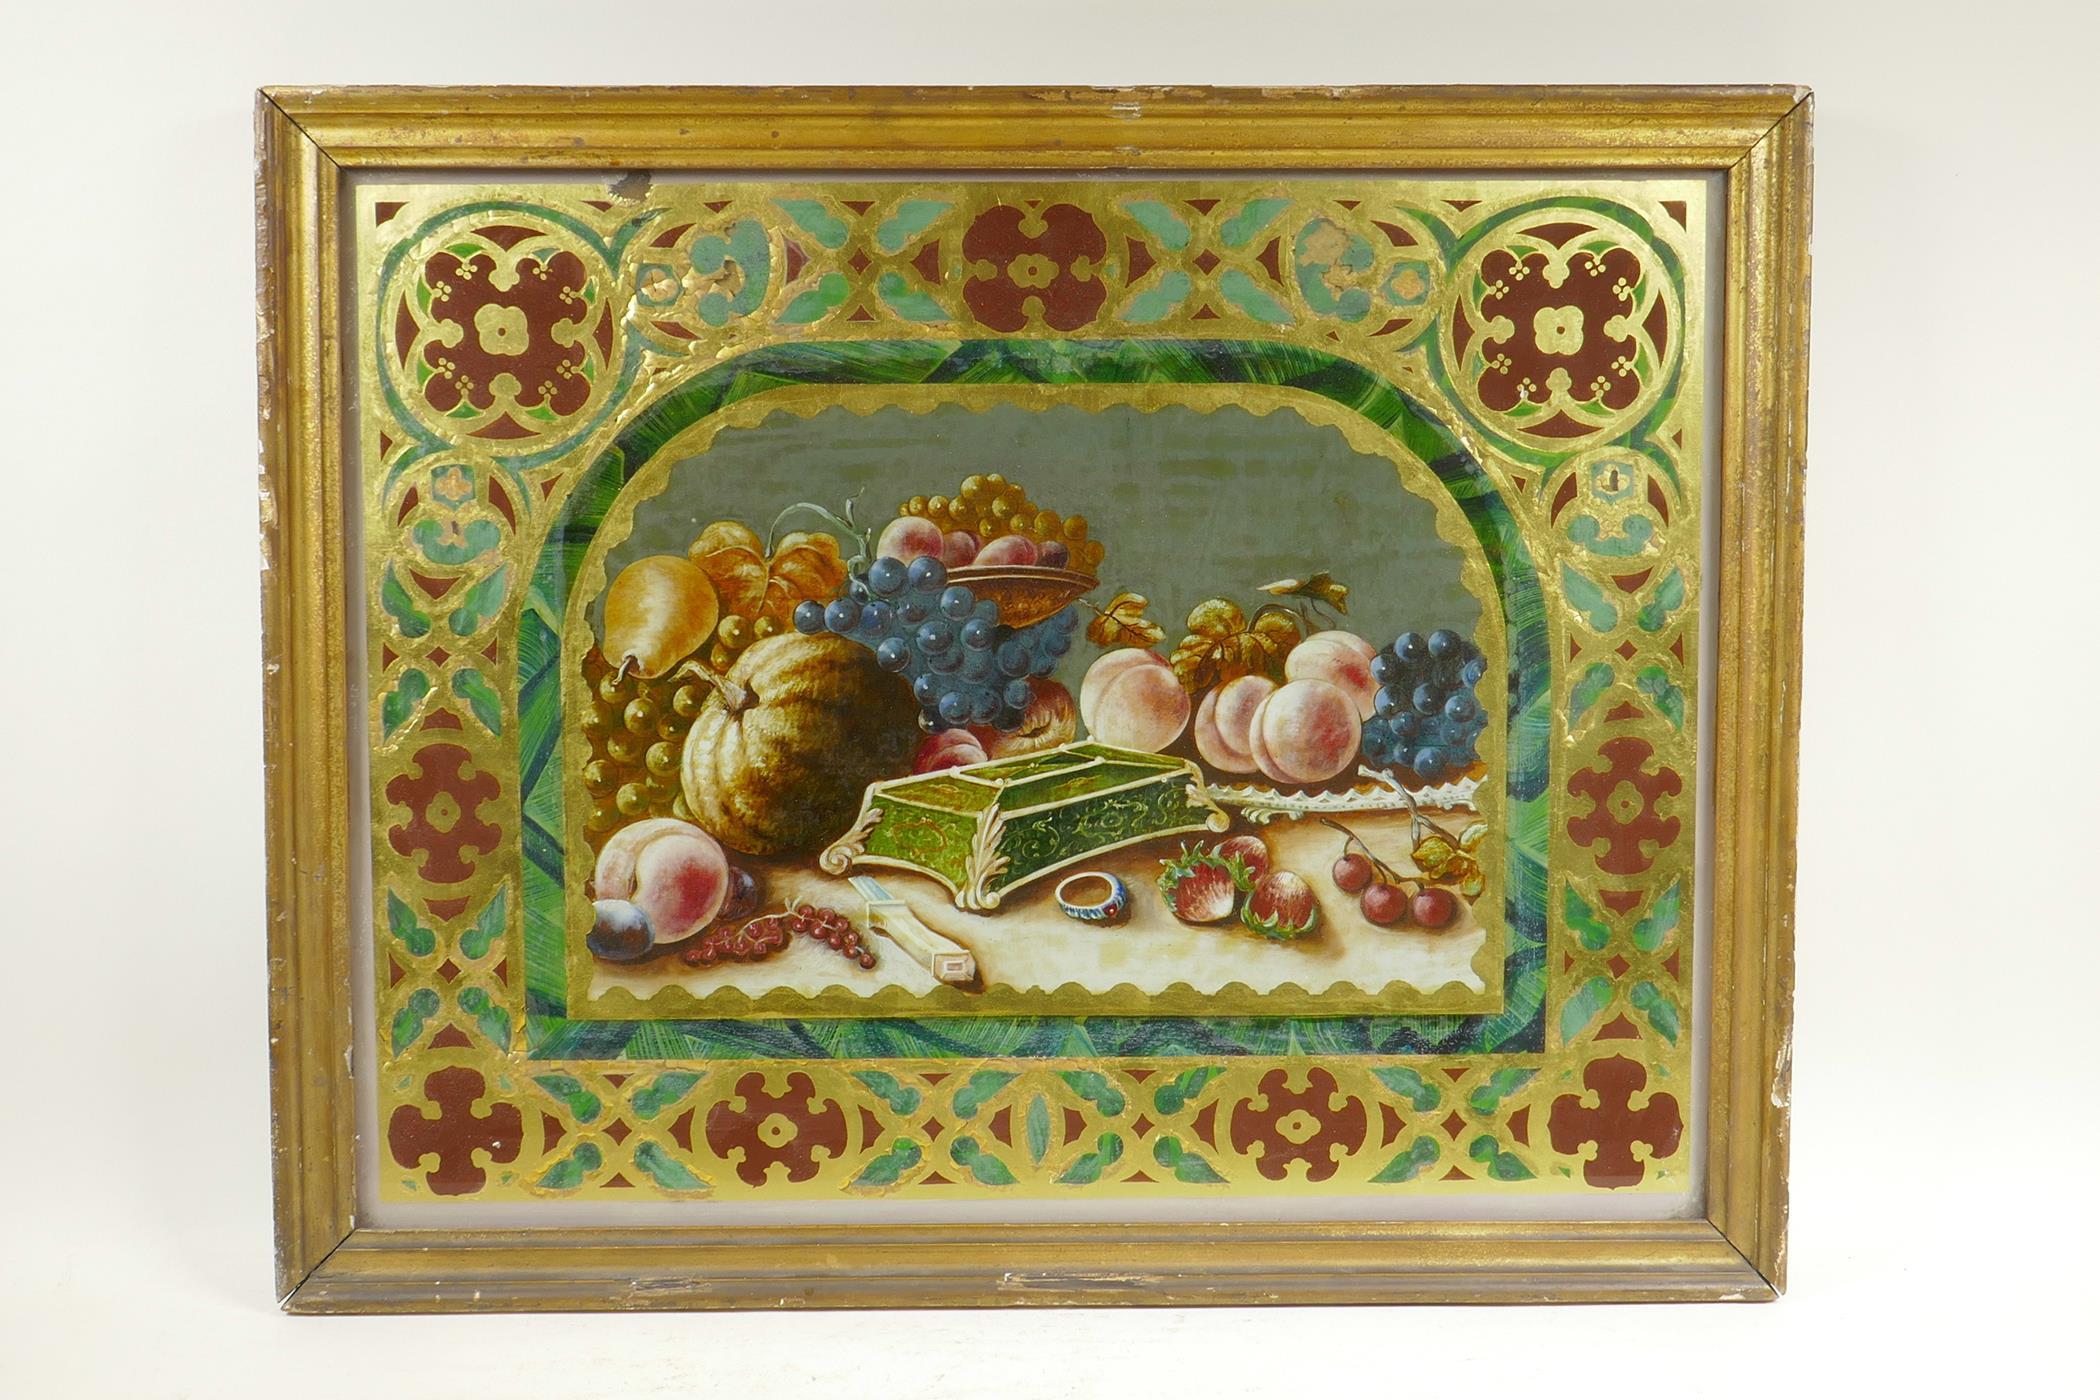 A C19th eglomise and reverse painted still life of fruit, with Gothic Revival decoration, in a